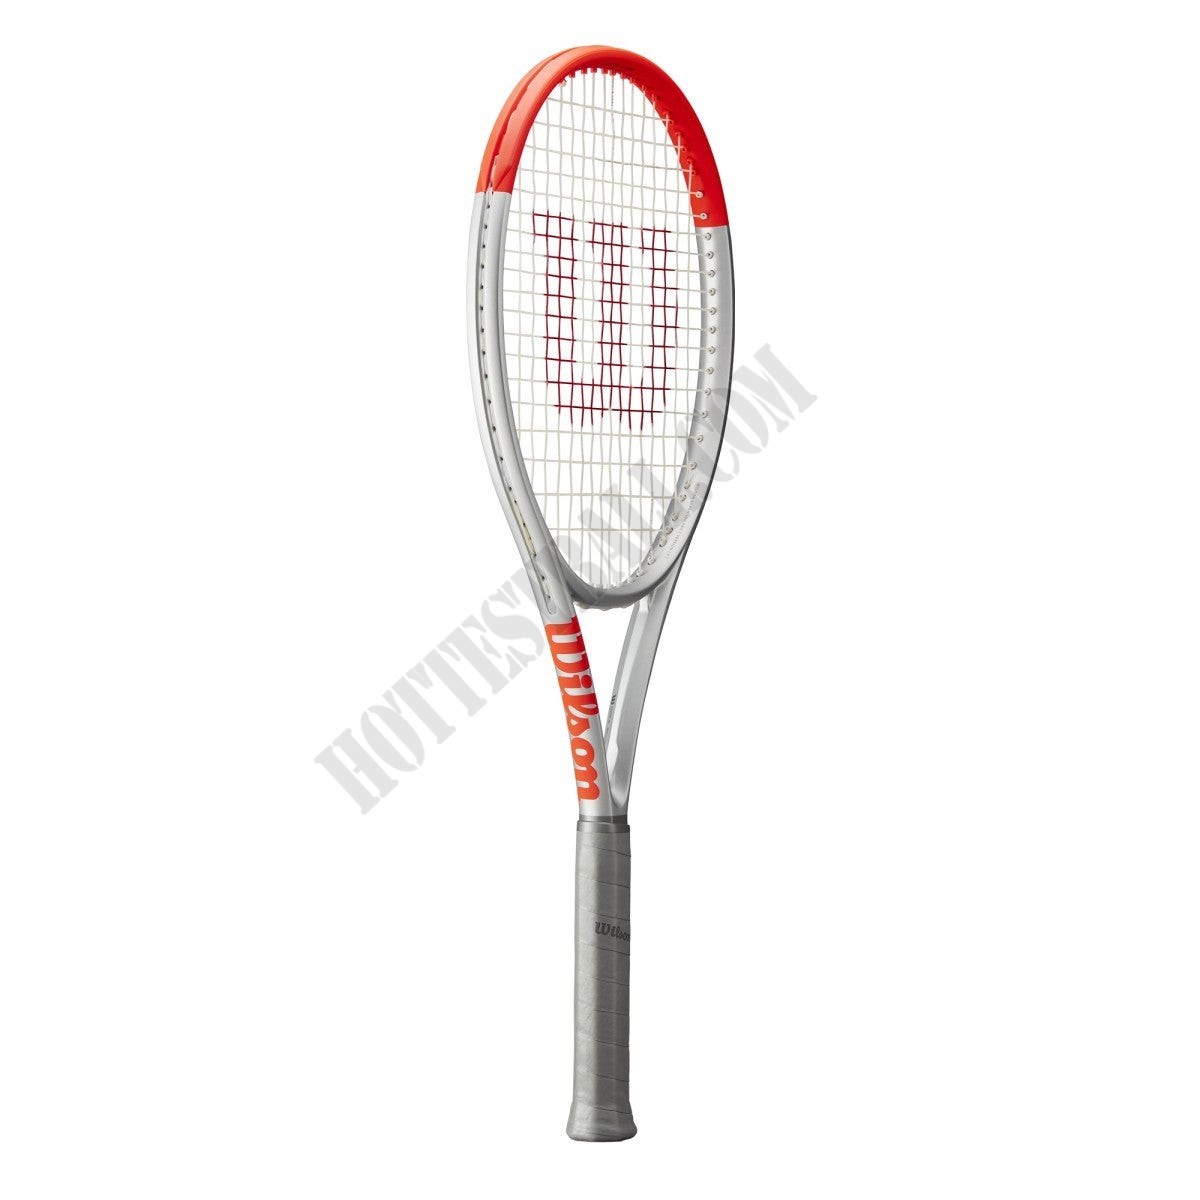 Clash 100 Pro Special Edition Tennis Racket - Wilson Discount Store - -0